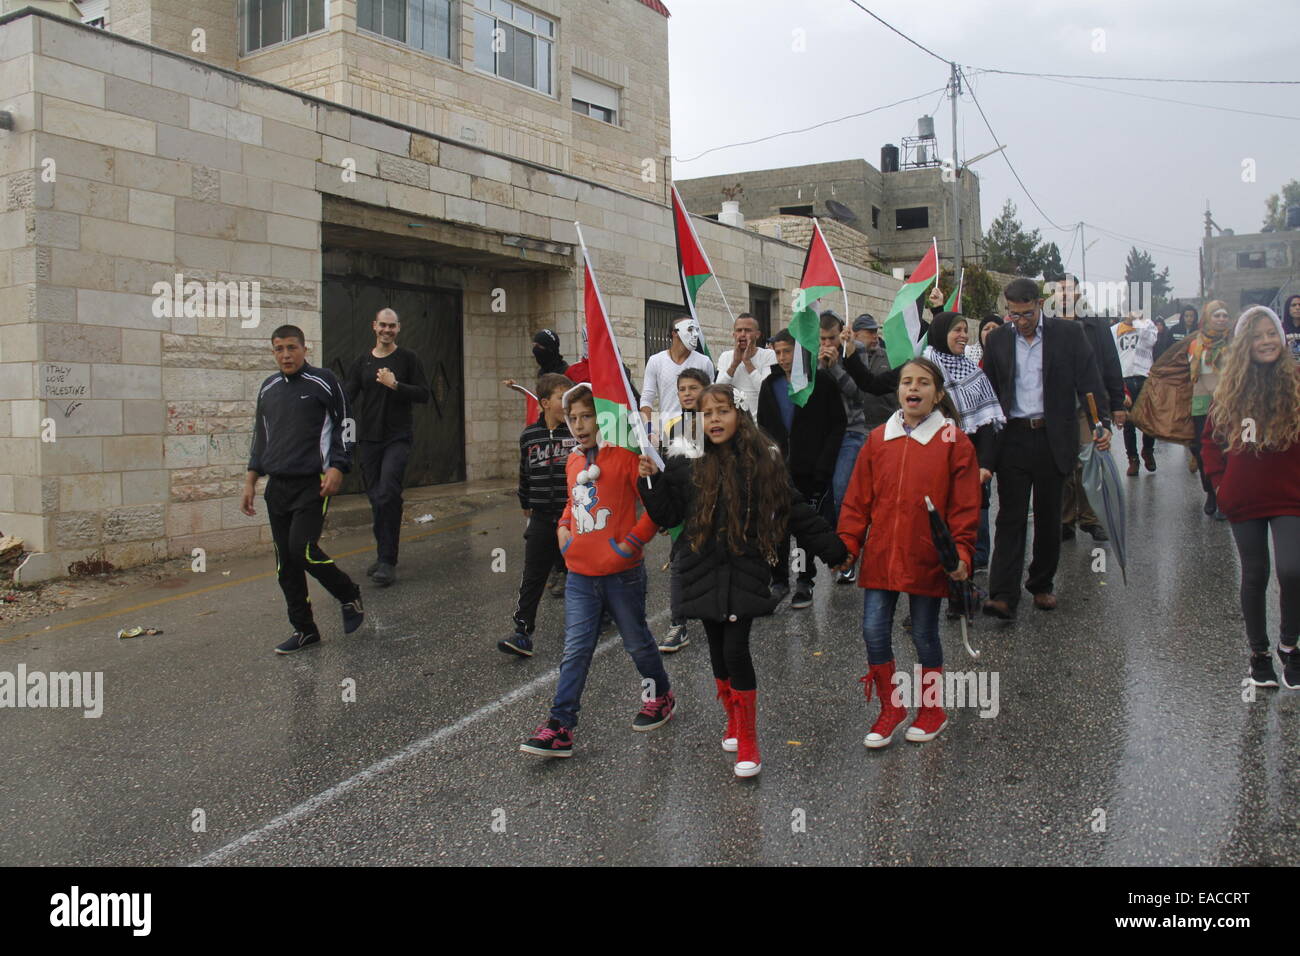 (141111) -- RAMALLAH, Nov. 11, 2014 (Xinhua) -- Palestinian girl Jana Jihad (C) participates in a demonstration against Jewish settlement in a West Bank village on Oct. 30, 2014. Jana has become famous for her reports of stories on social media that she has been named as the youngest amateur reporter in Palestine. Jana said she would like to study in Harvard University in the future and become a professional journalist and writer. 'I dream of a country where there are no checkpoints and no tear gas, where I can go to school freely without interruption. I dream on a country where children are Stock Photo